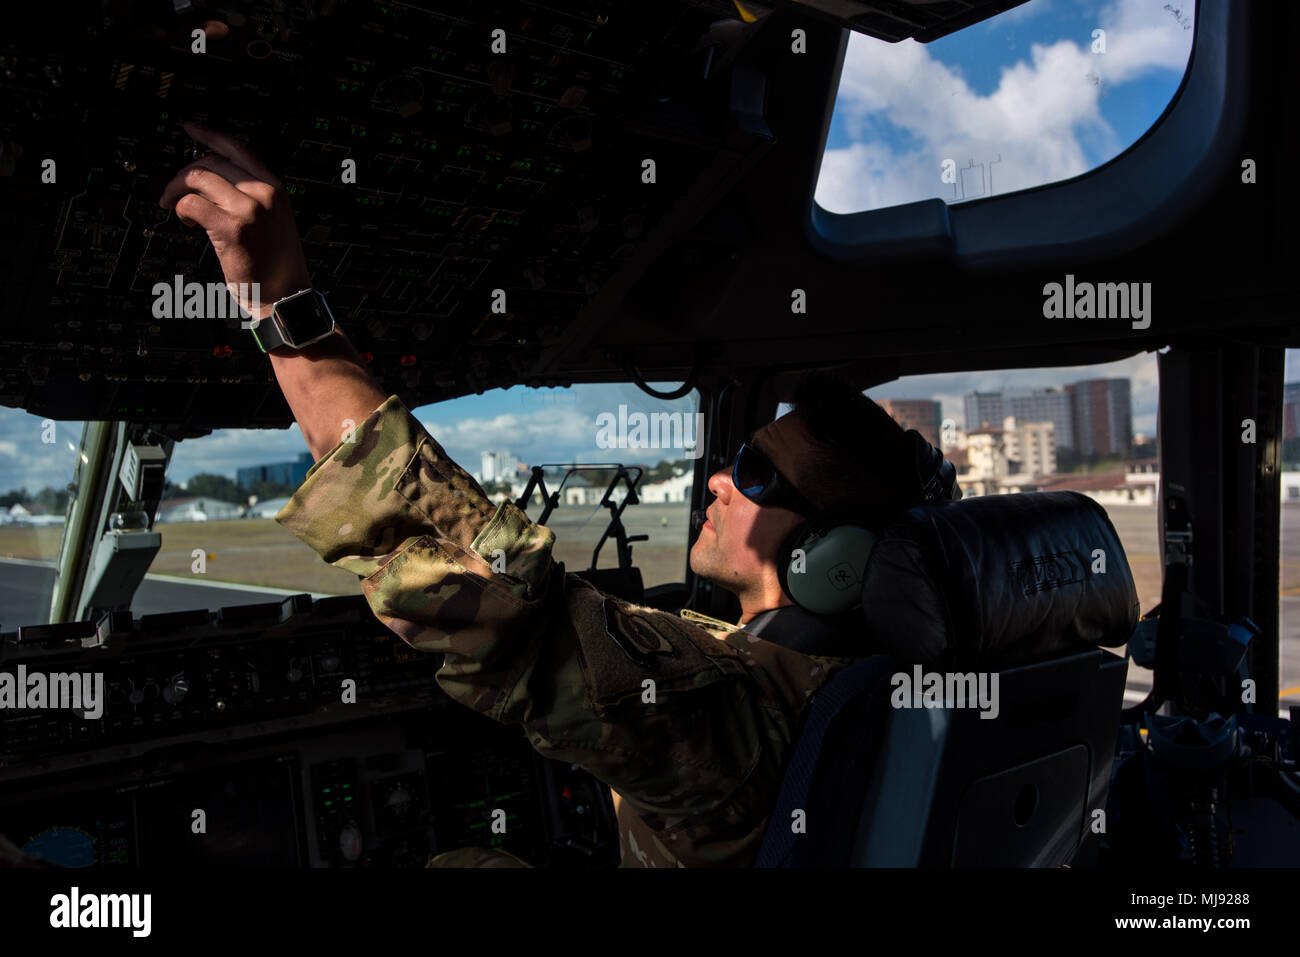 U.S. Air Force Maj. Geno Salazar both 21st Airlift Squadron C-17 Globemaster III pilots, makes post flight adjustments after landing with Denton Program emergency response vehicles to La Aurora International Airport, Guatemala City, Guatemala, April 20, 2018. The Denton Program is a Department of Defense transportation program that moves humanitarian cargo, donated by U.S. based Non-Governmental Organizations to developing nations to ease human suffering. The emergency vehicles were donated by the Mission of Love Foundation, they are the largest user of the Denton Program, having delivered med Stock Photo